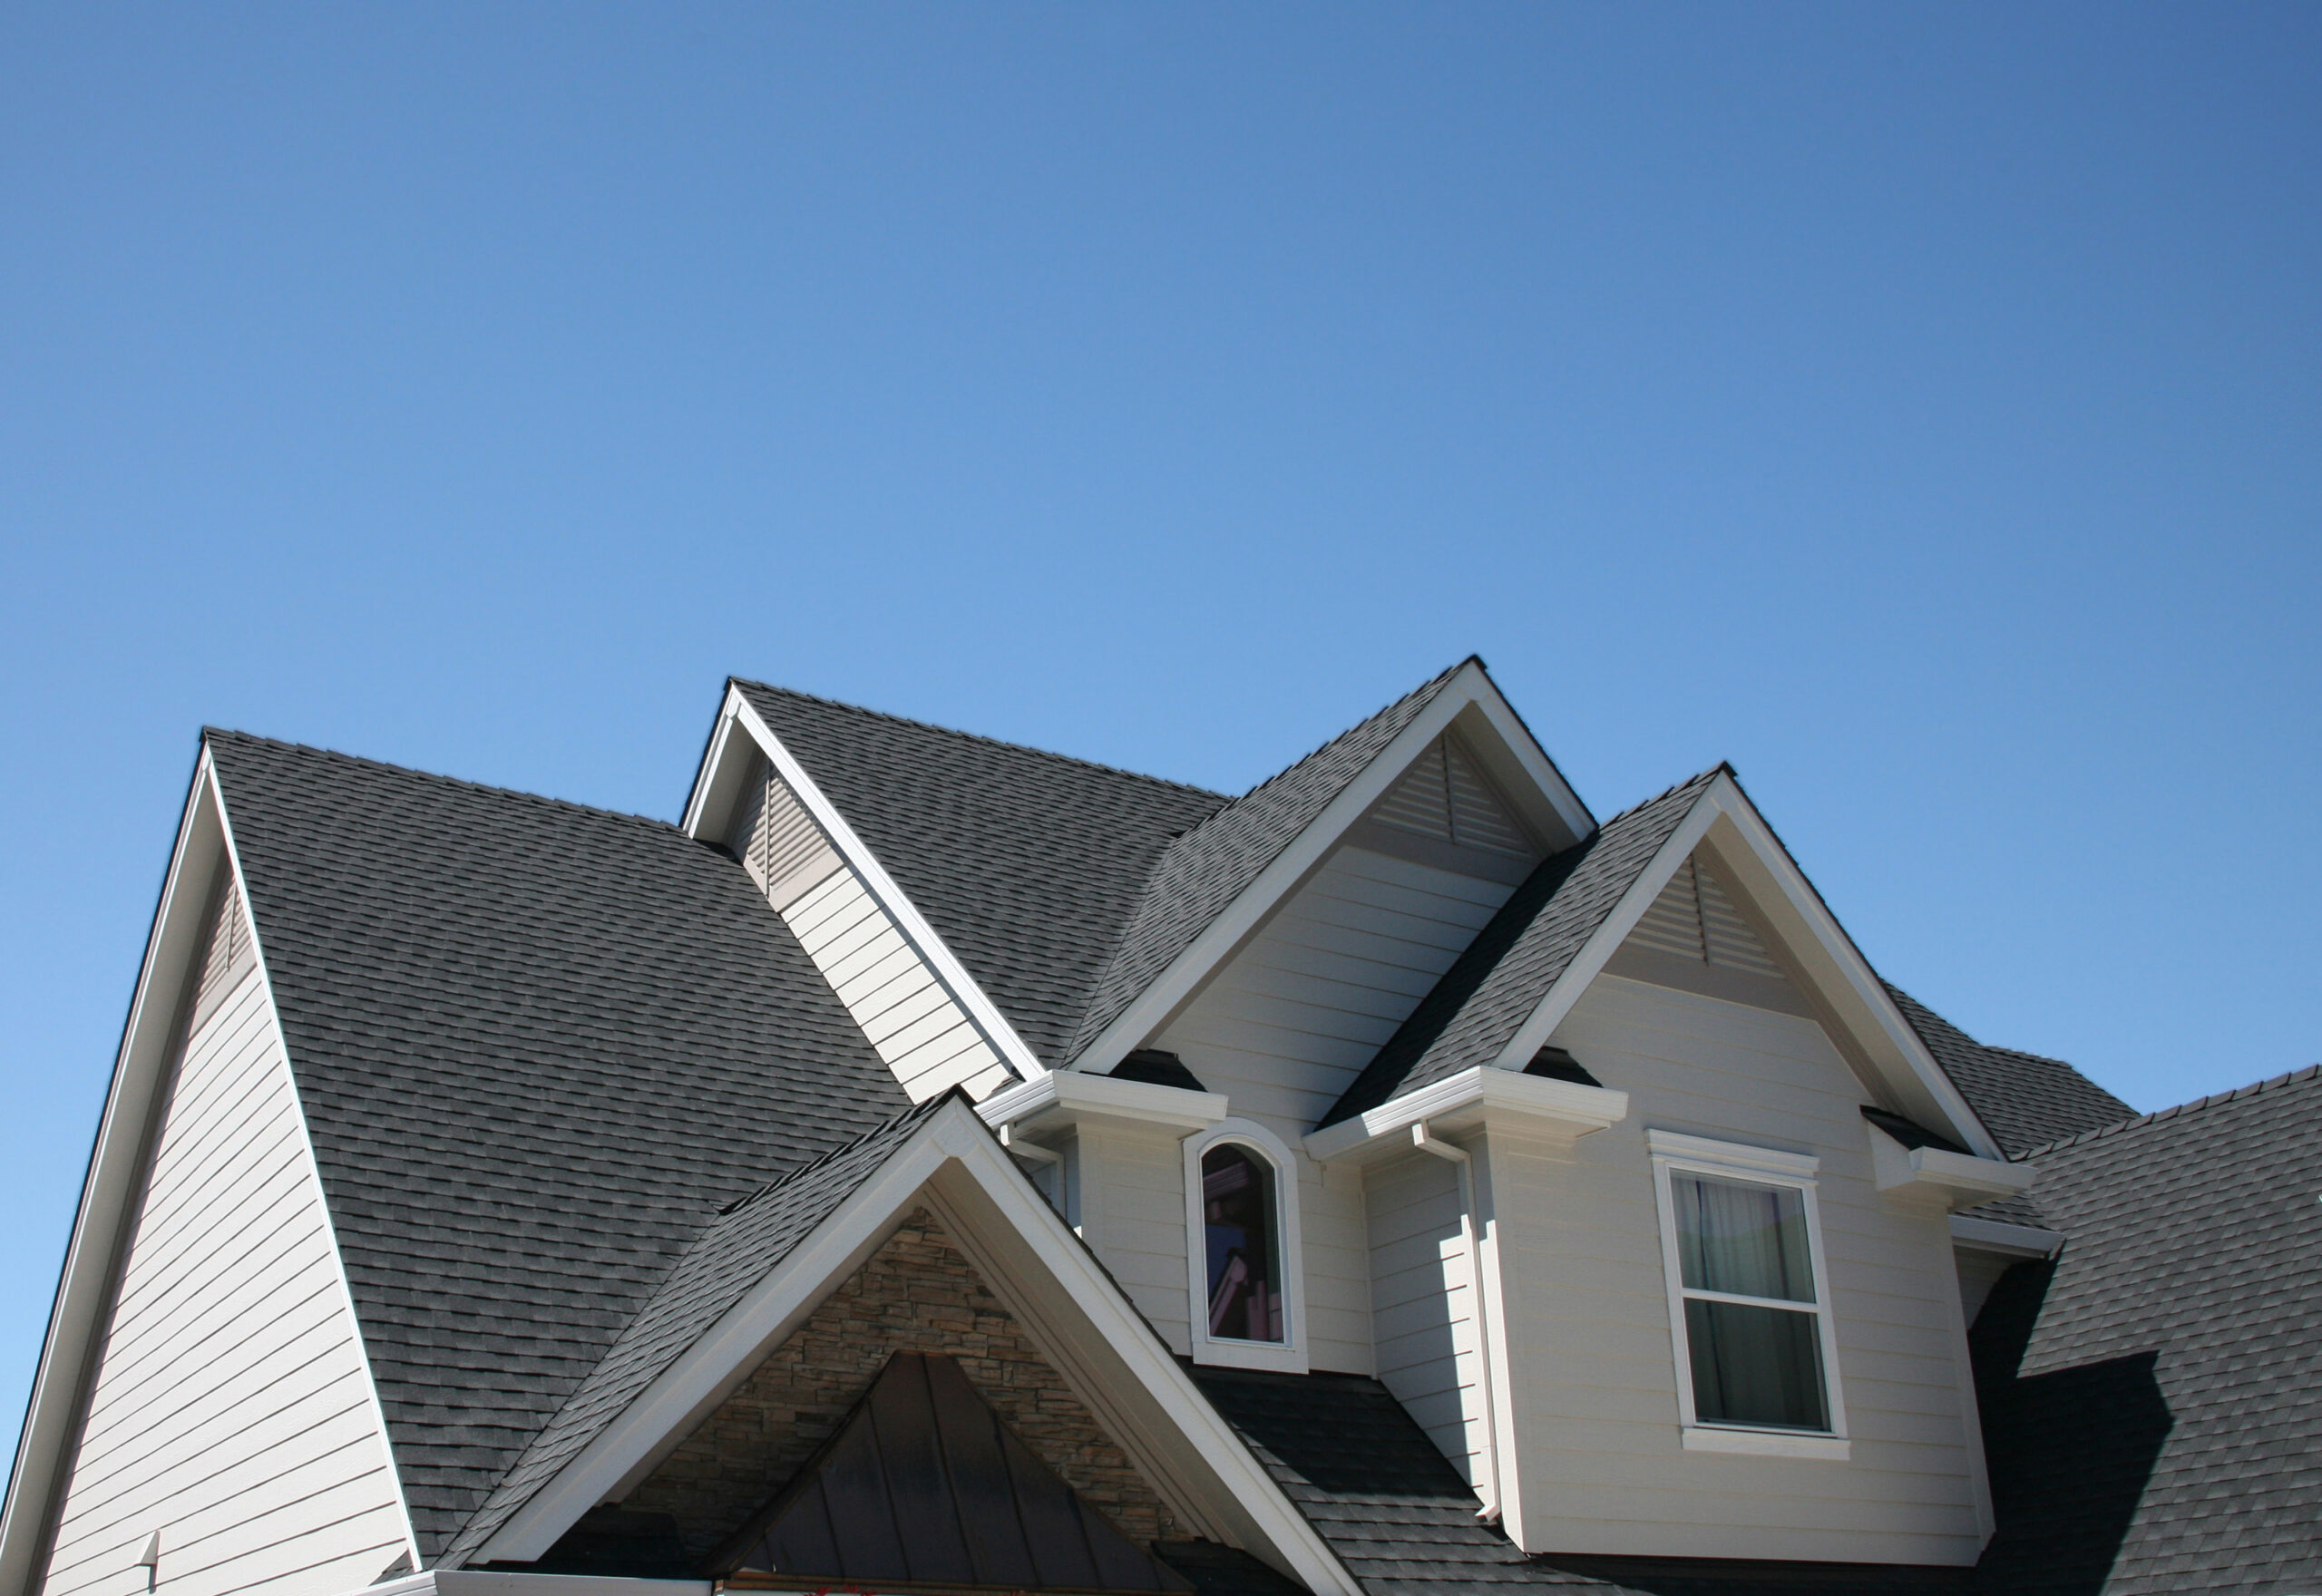 A clear blue sky provides the backdrop for a house showcasing different types of roof styles, including steep gable roofs and a dormer window, all covered in grey shingles.